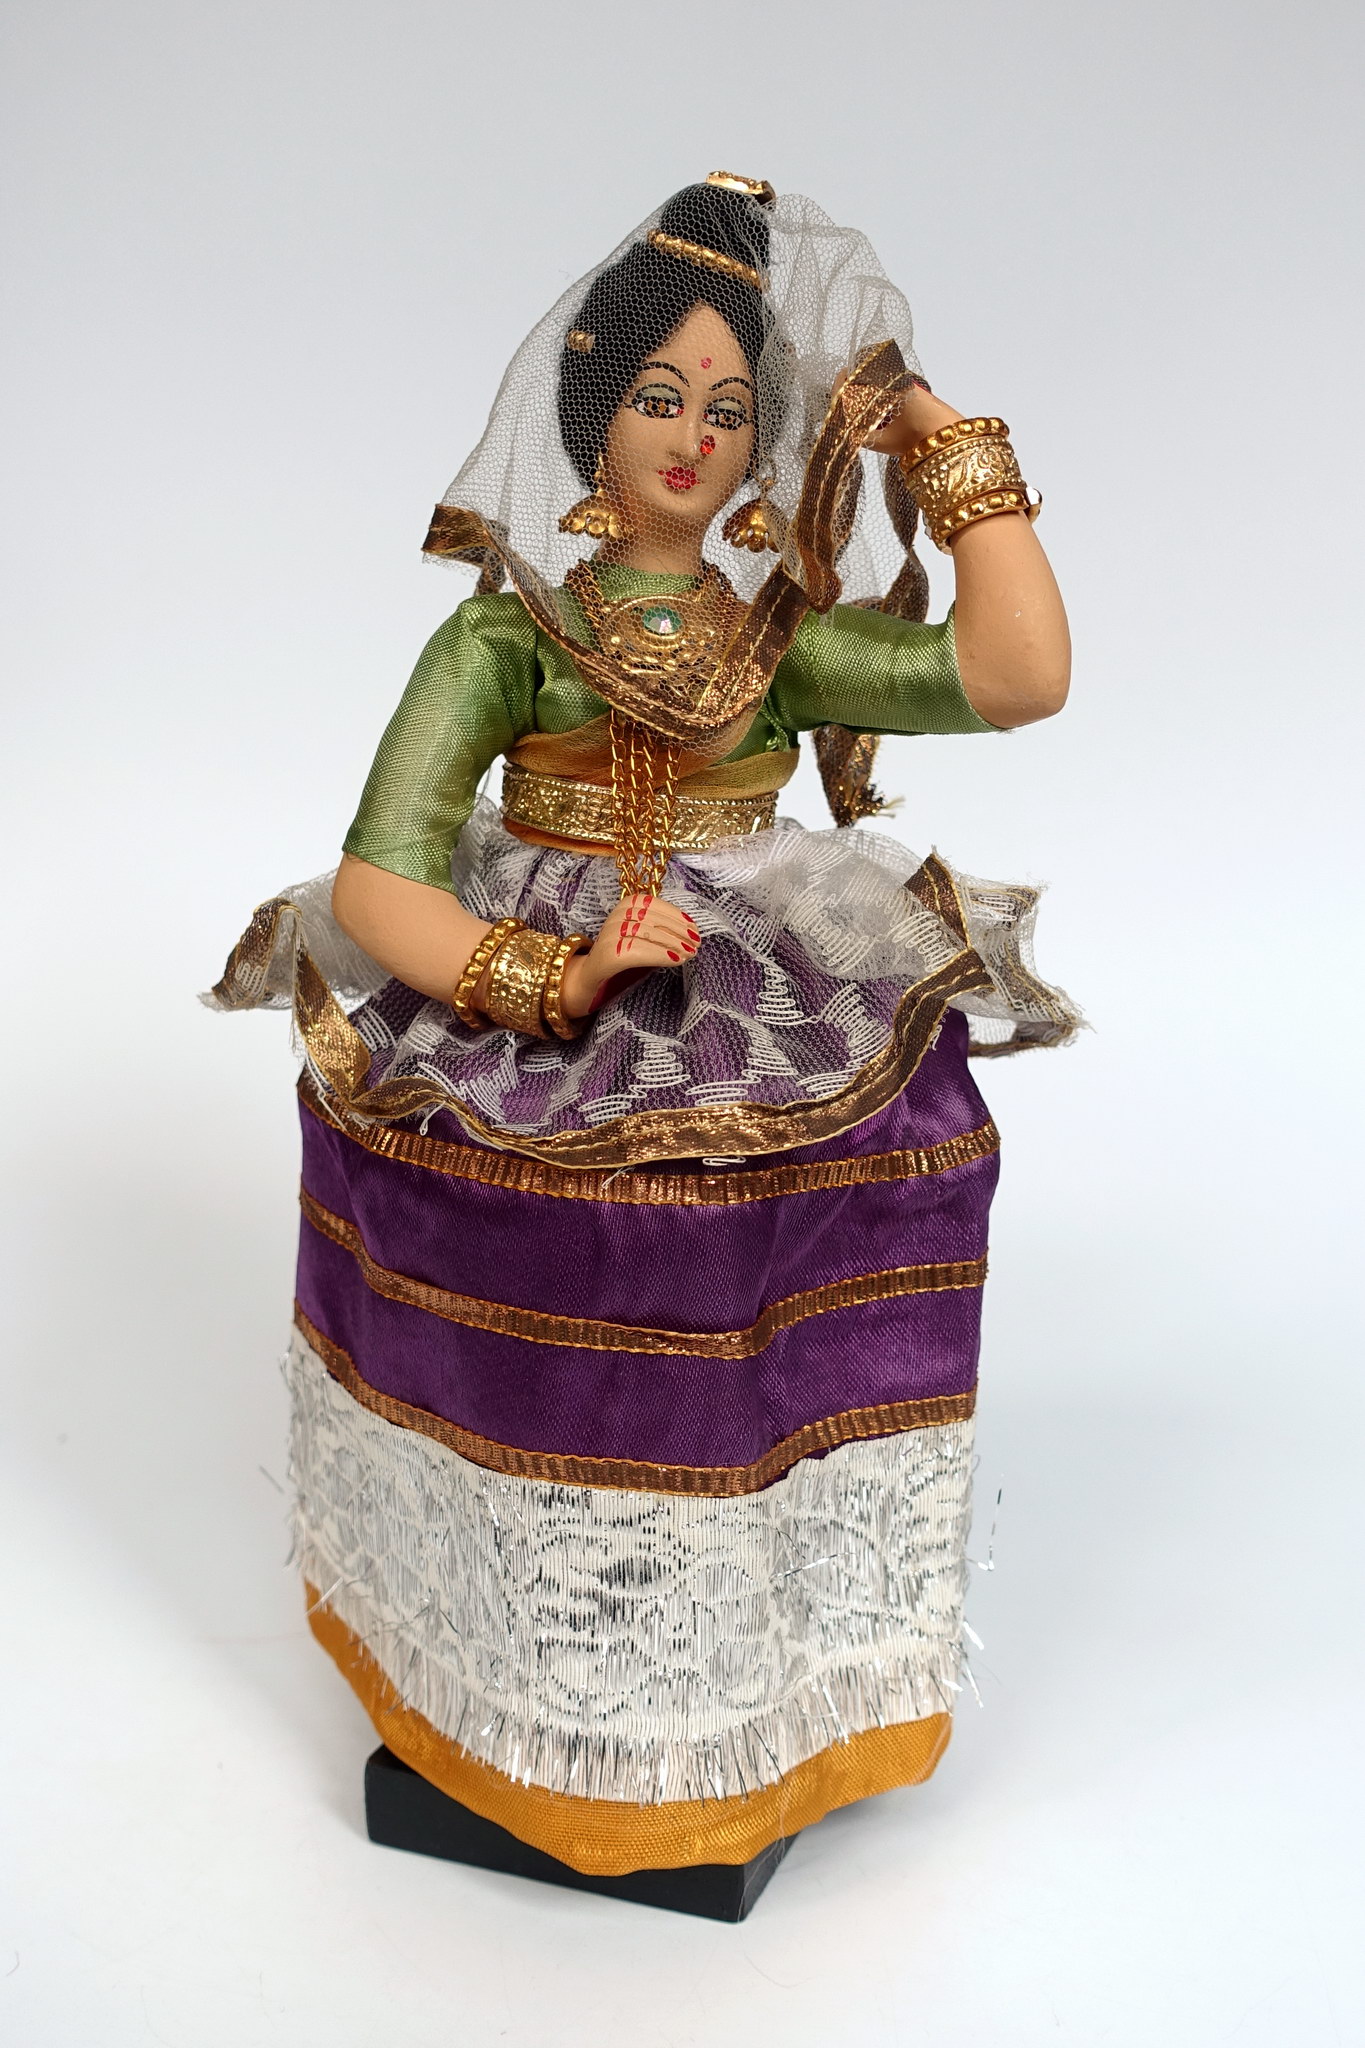 India Doll Manipuri Dancer | National costume dolls from all over the world